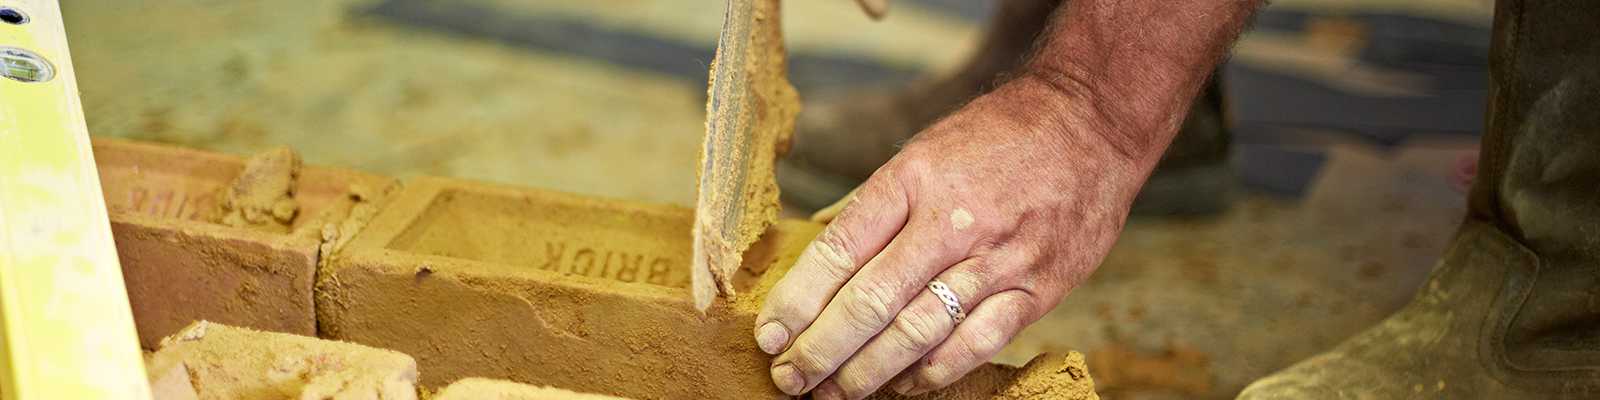 NVQ Level 2 Bricklaying Course